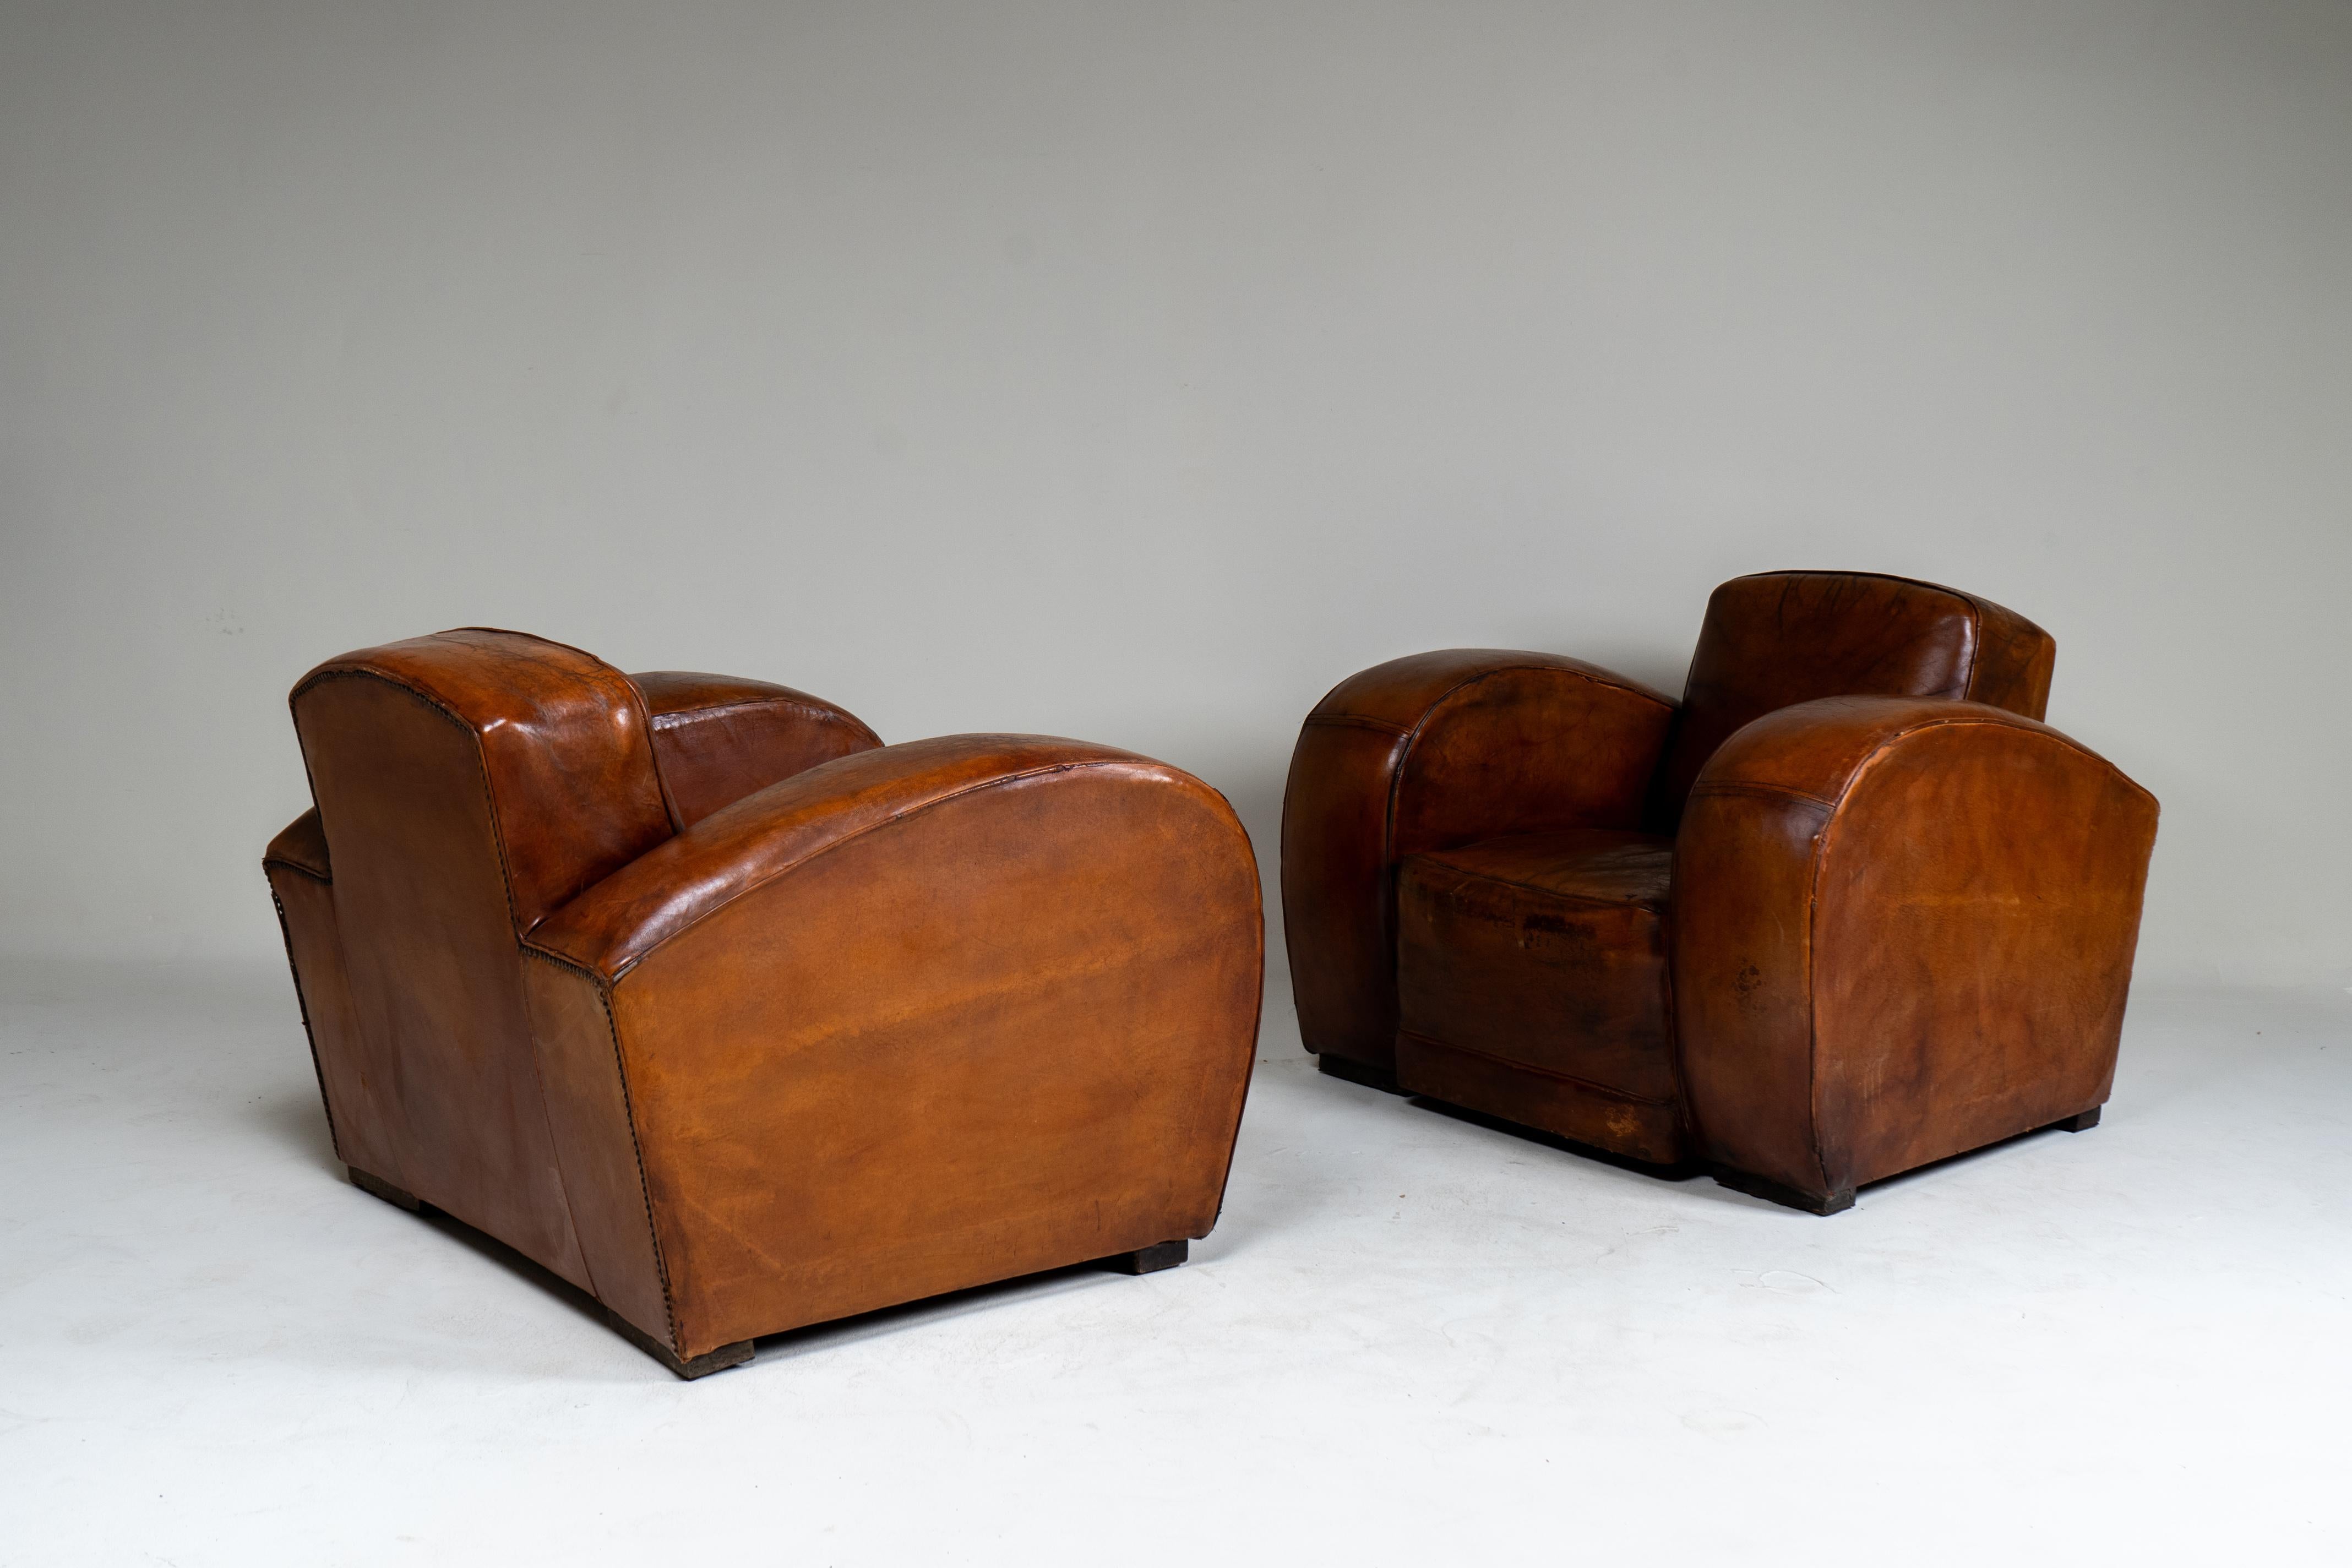 A Pair of Art Deco Leather Club Chairs, France c.1930 For Sale 5